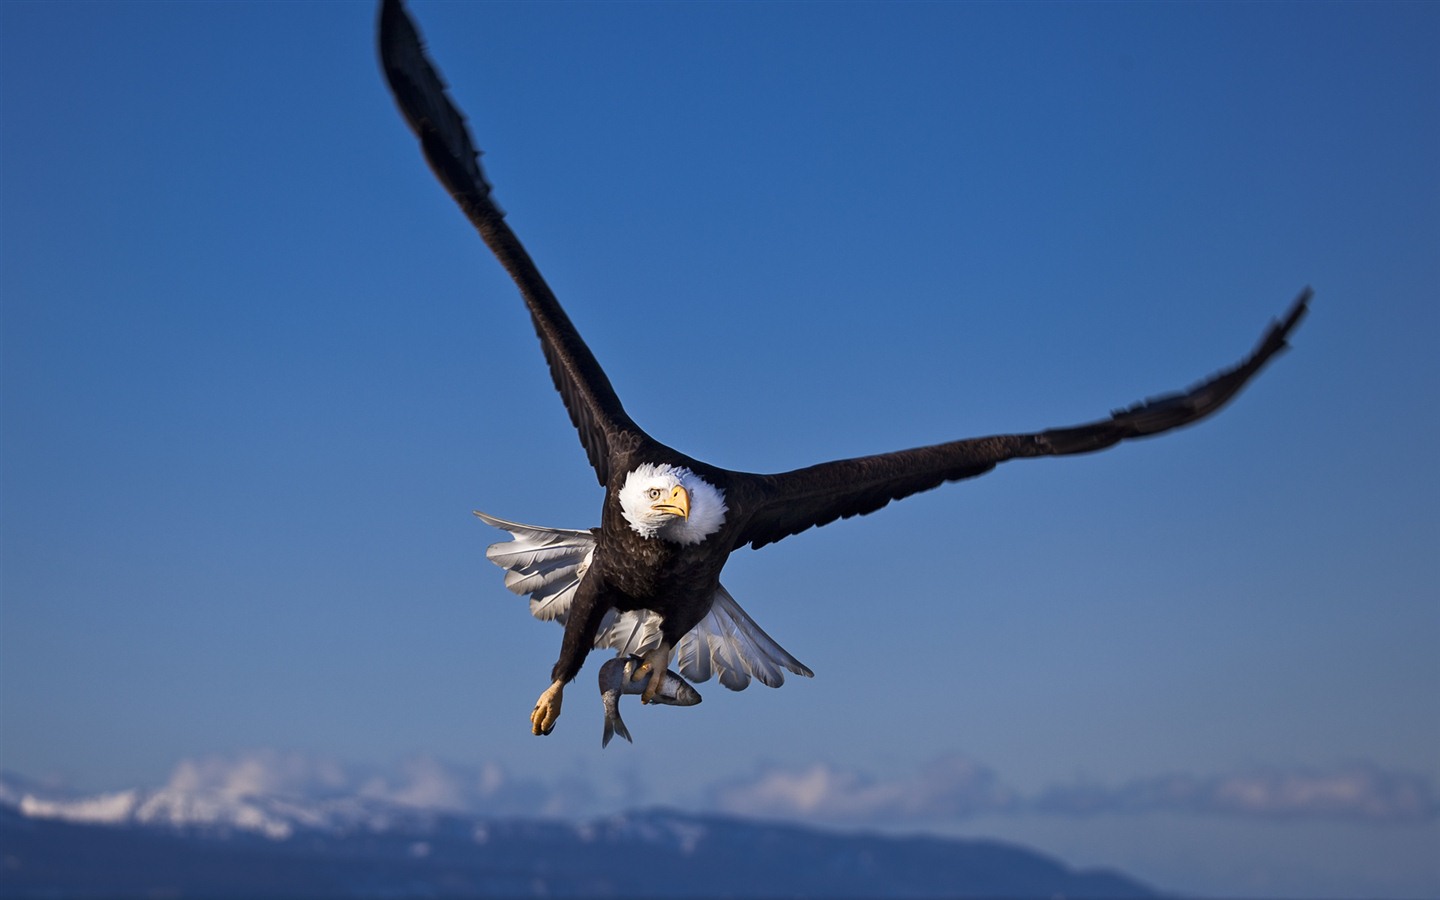 Windows 7 Wallpapers: aves rapaces #2 - 1440x900